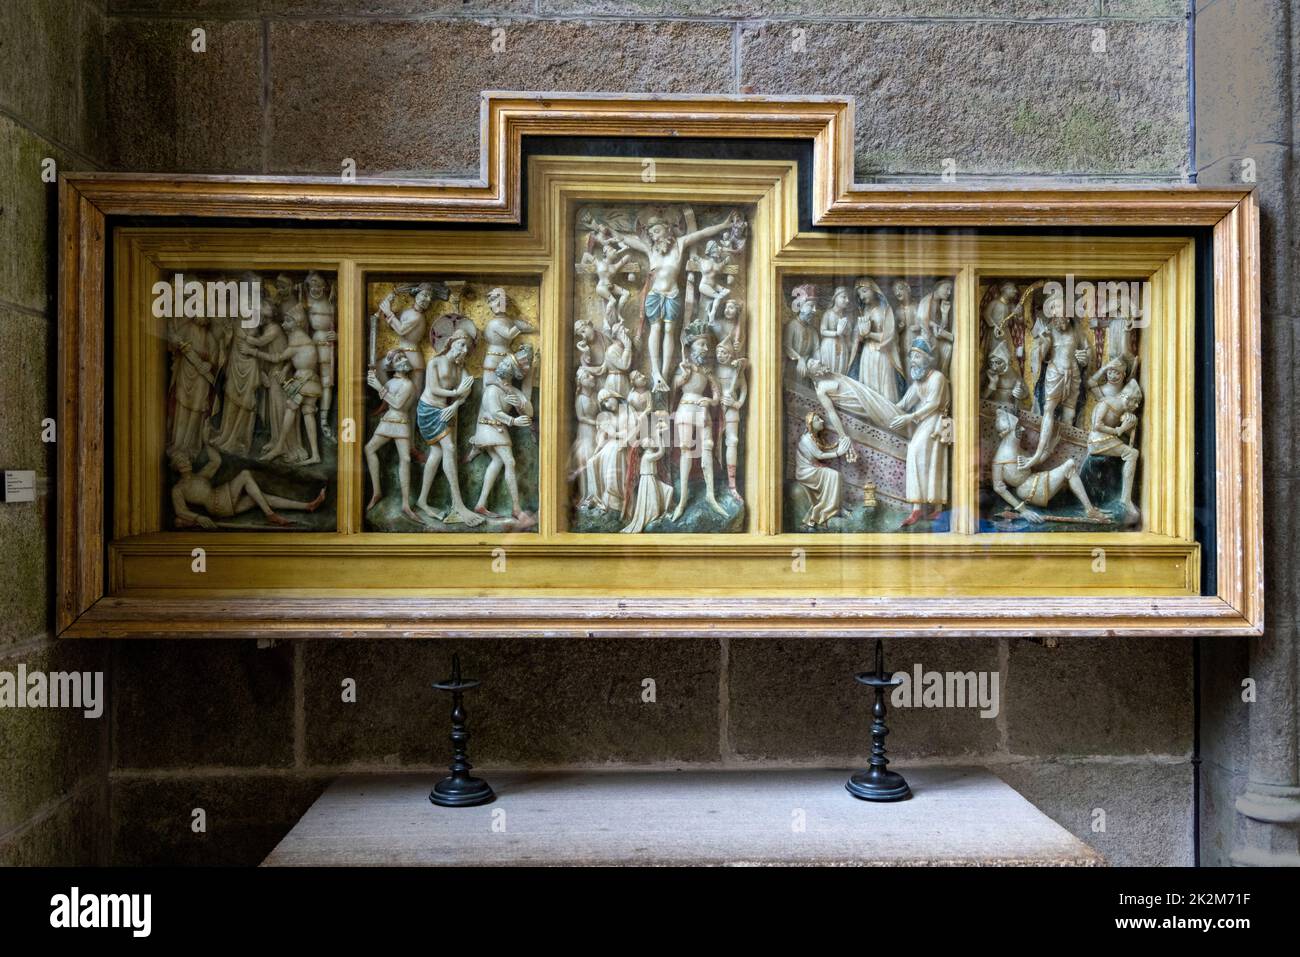 Ancient bas-relief of biblical scenes in the monastry of Le Mont Saint-Michel, a Unesco World Heritage Site, Normandy, France, Europe. Stock Photo